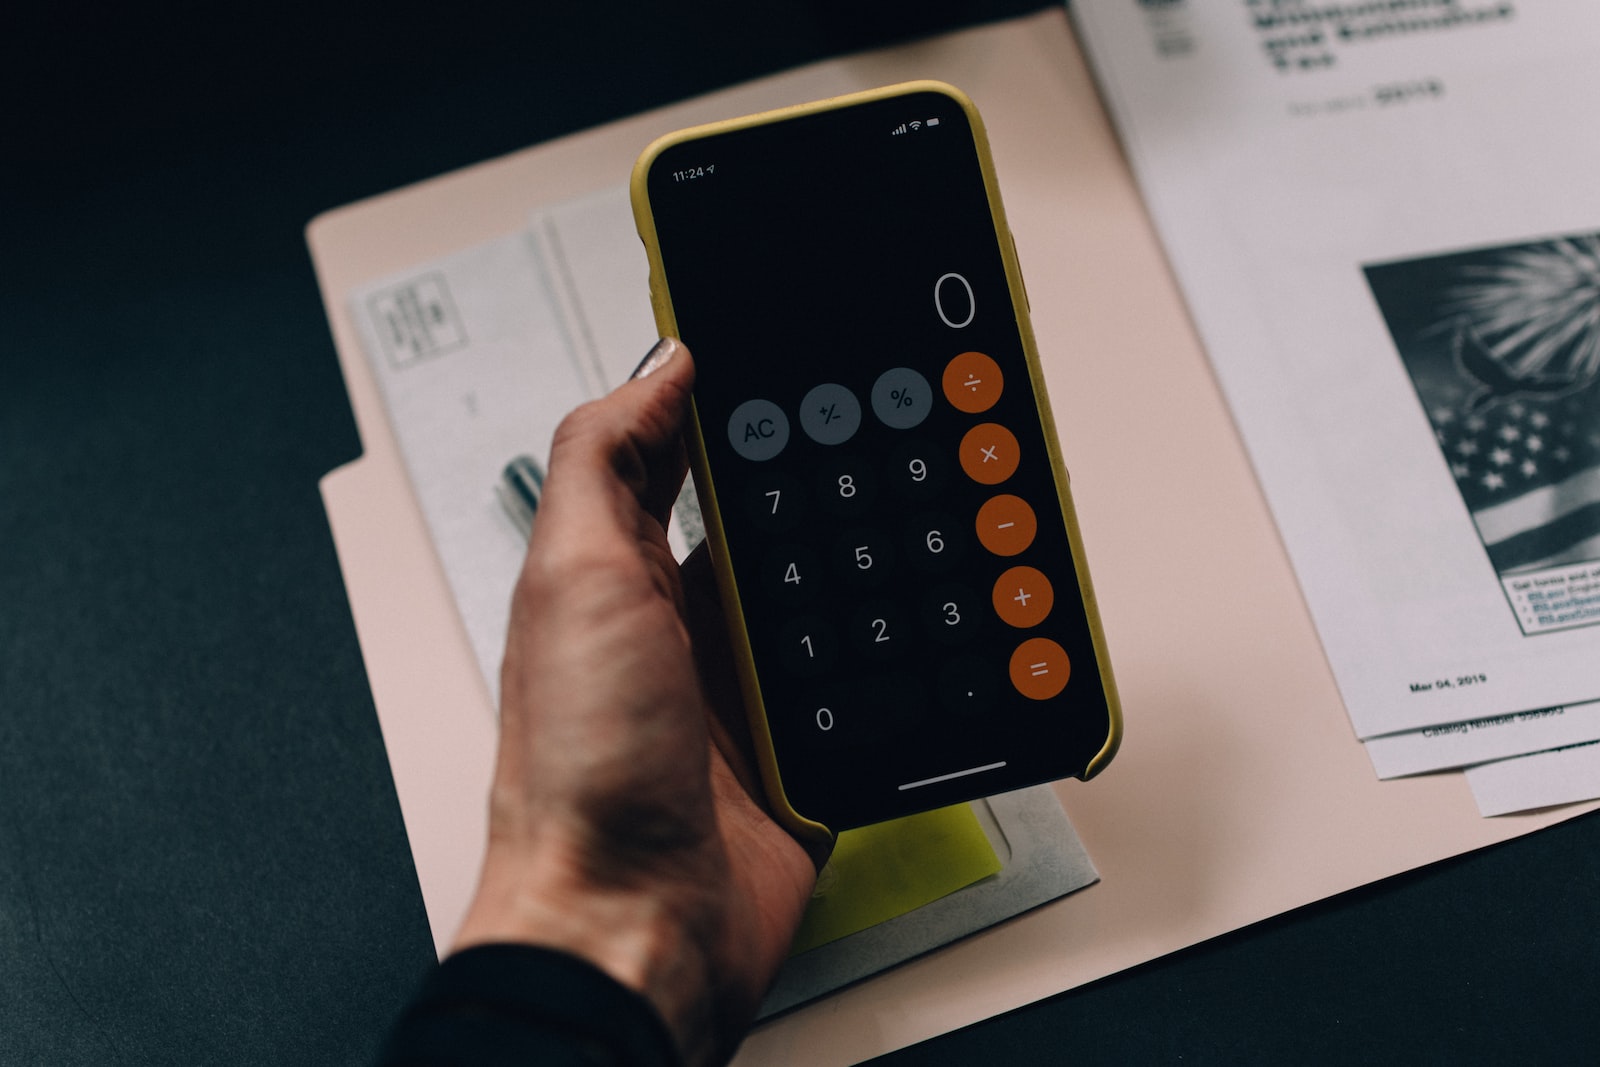 iPhone open to calculator app being held in a person's hand above a manila folder of paperwork